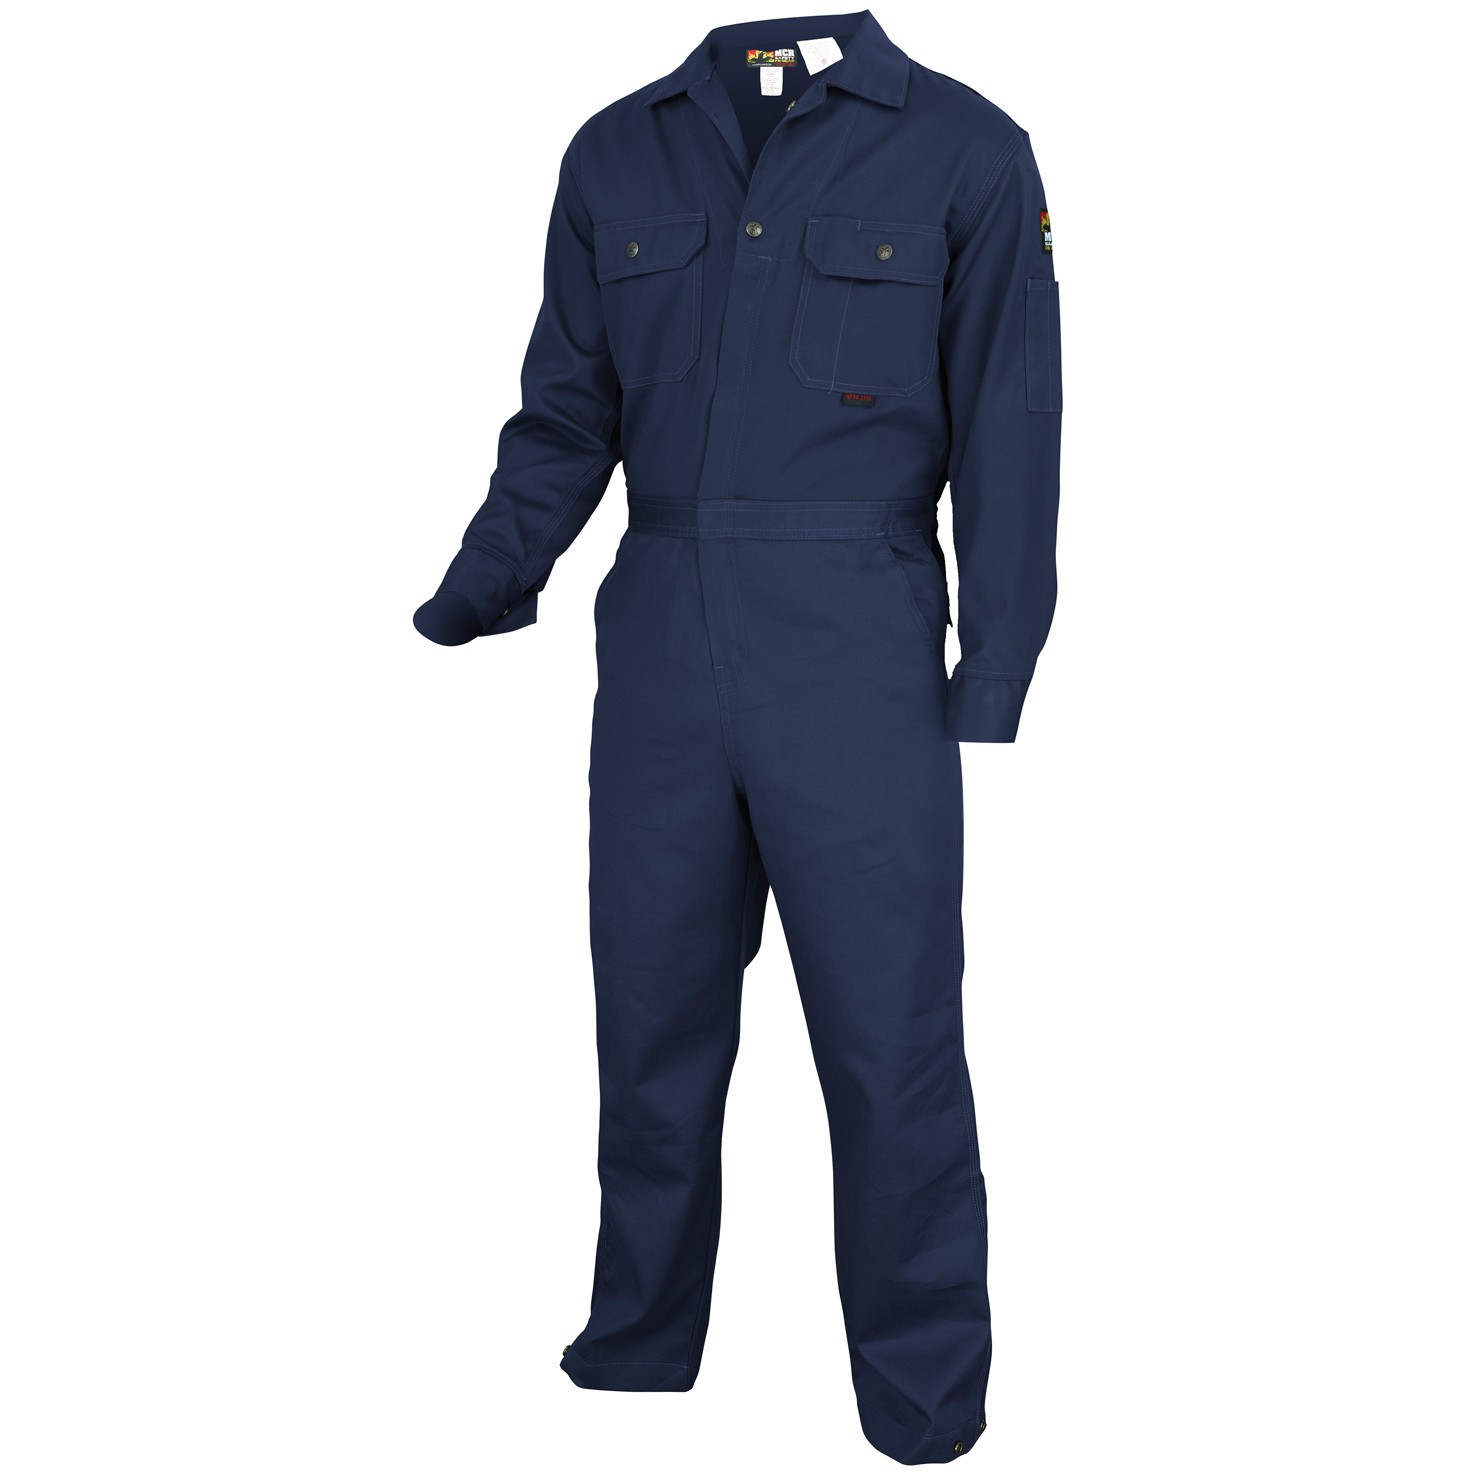 MCR Safety DC1N Deluxe Contractor FR Coveralls - Navy Blue | FullSource.com